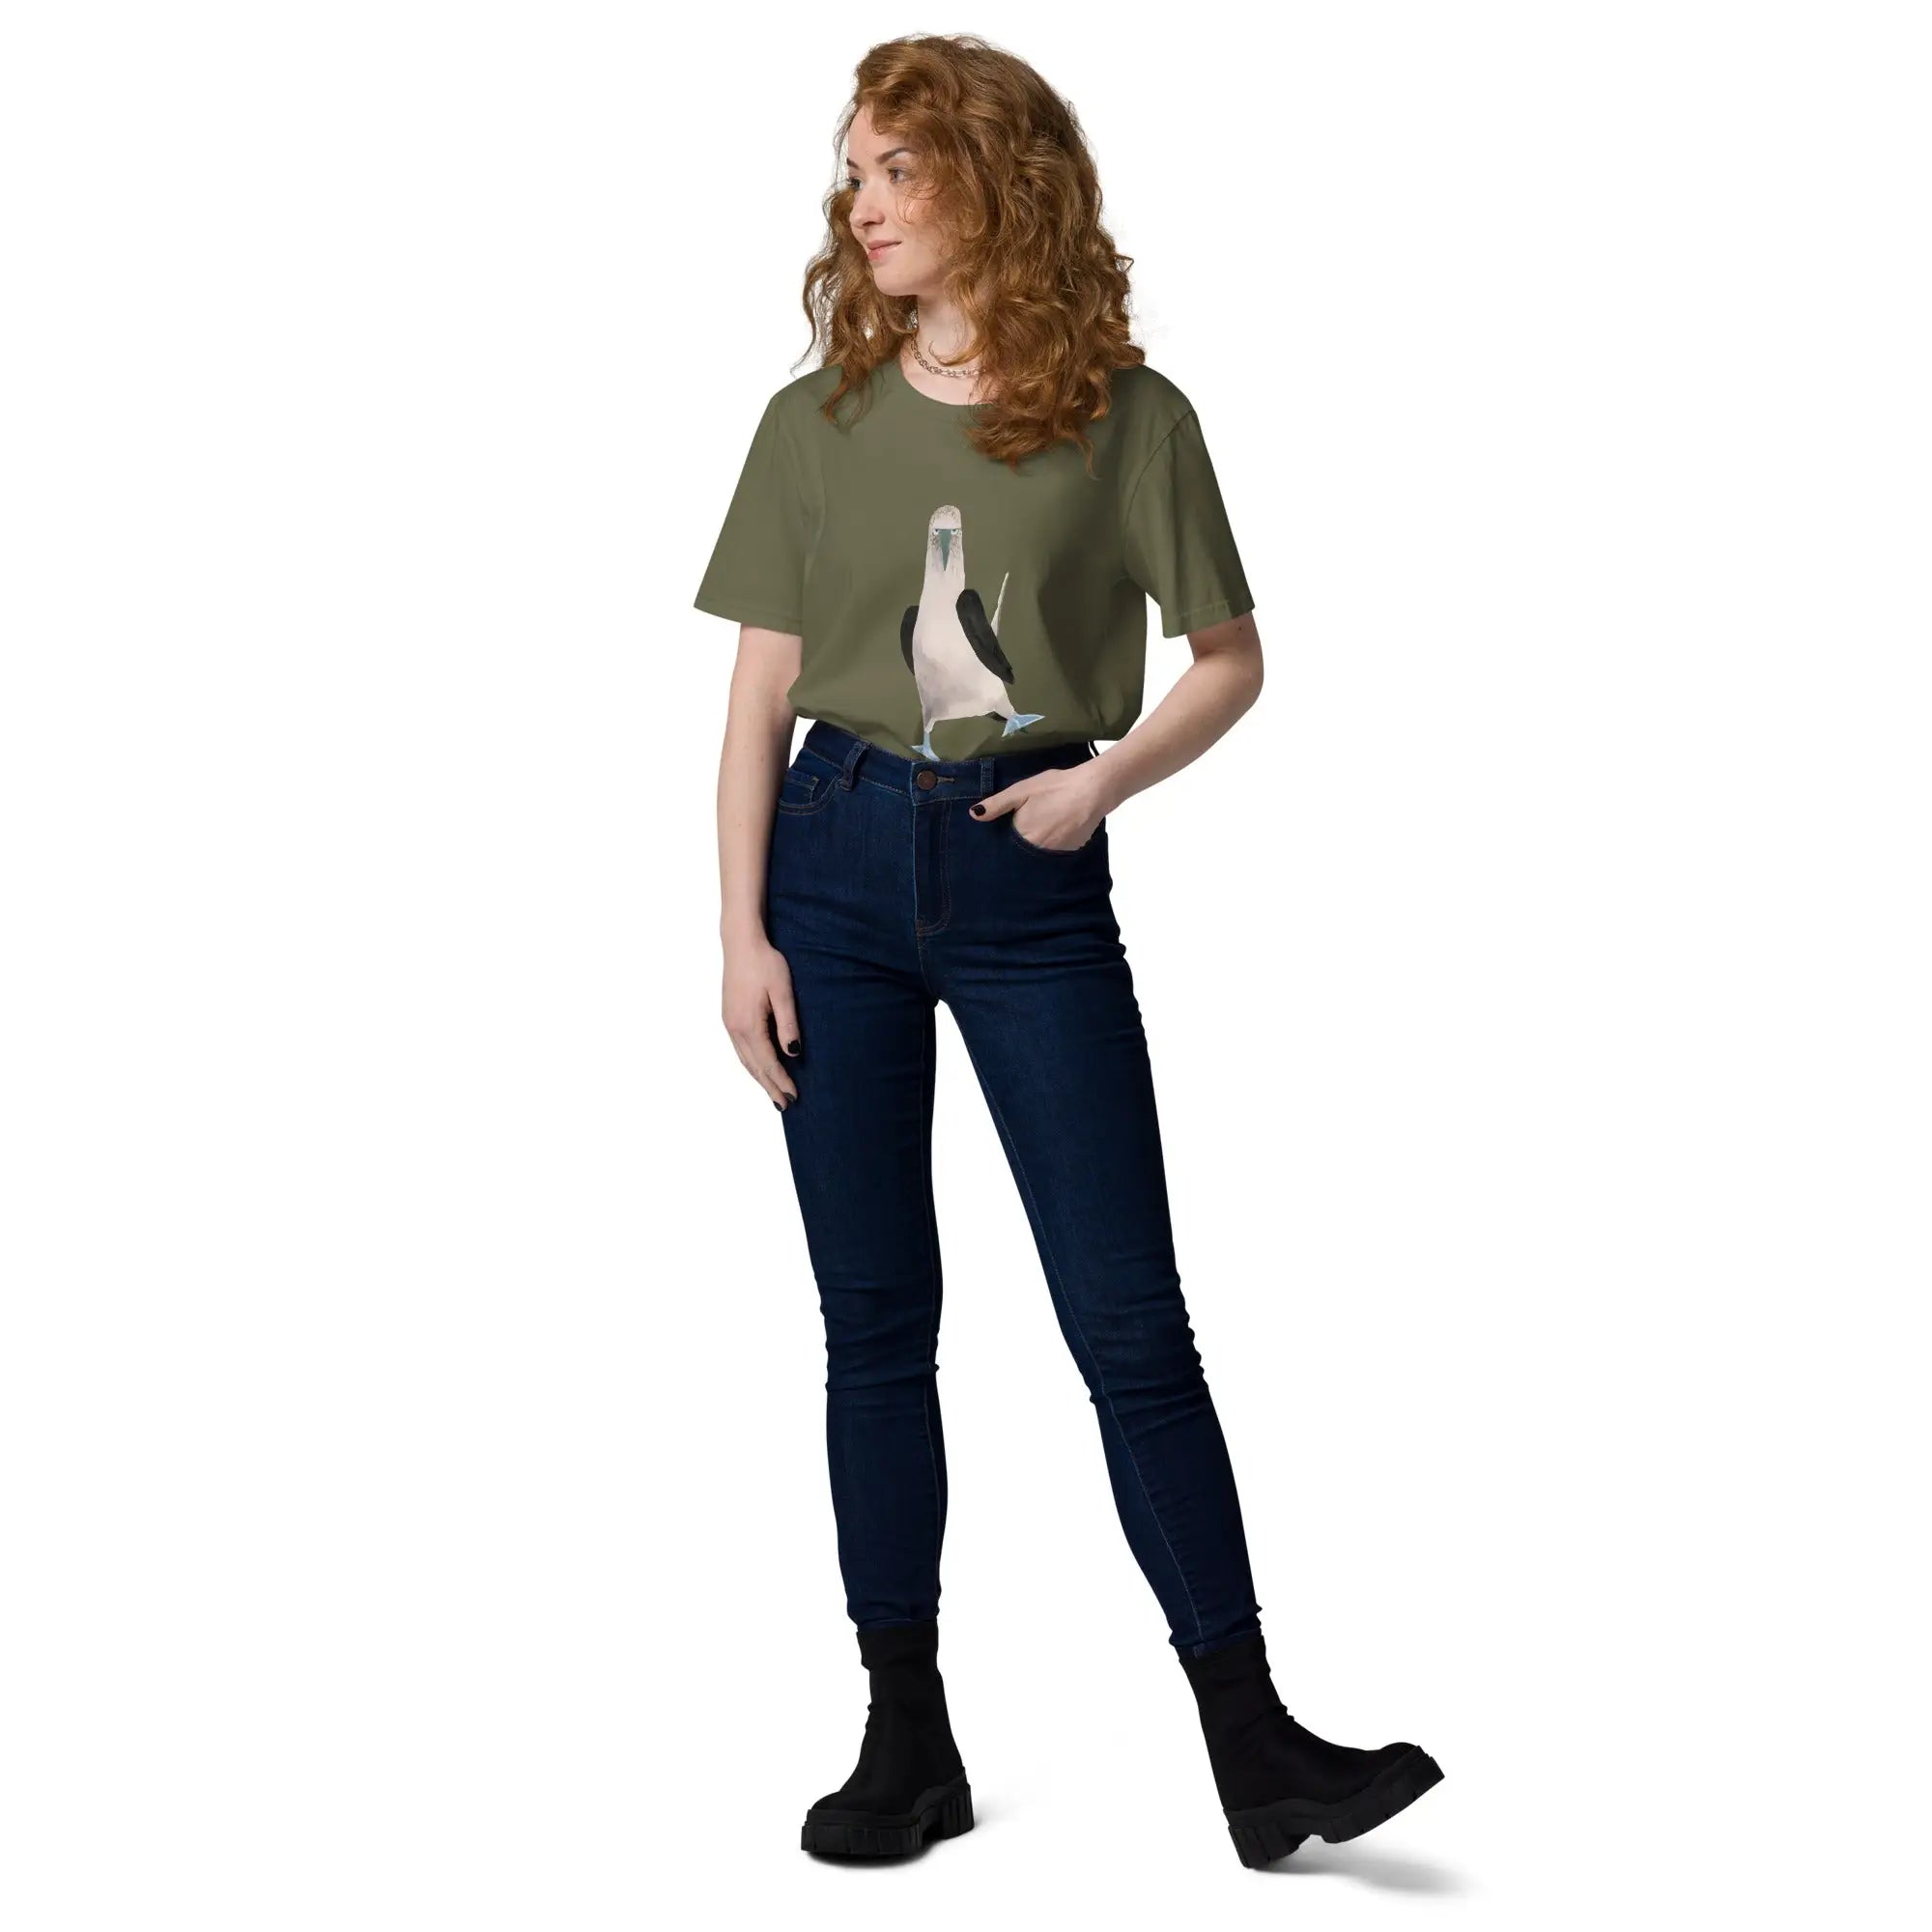 Organic Cotton T-Shirt by Booby - Woman in Green Shirt and Jeans